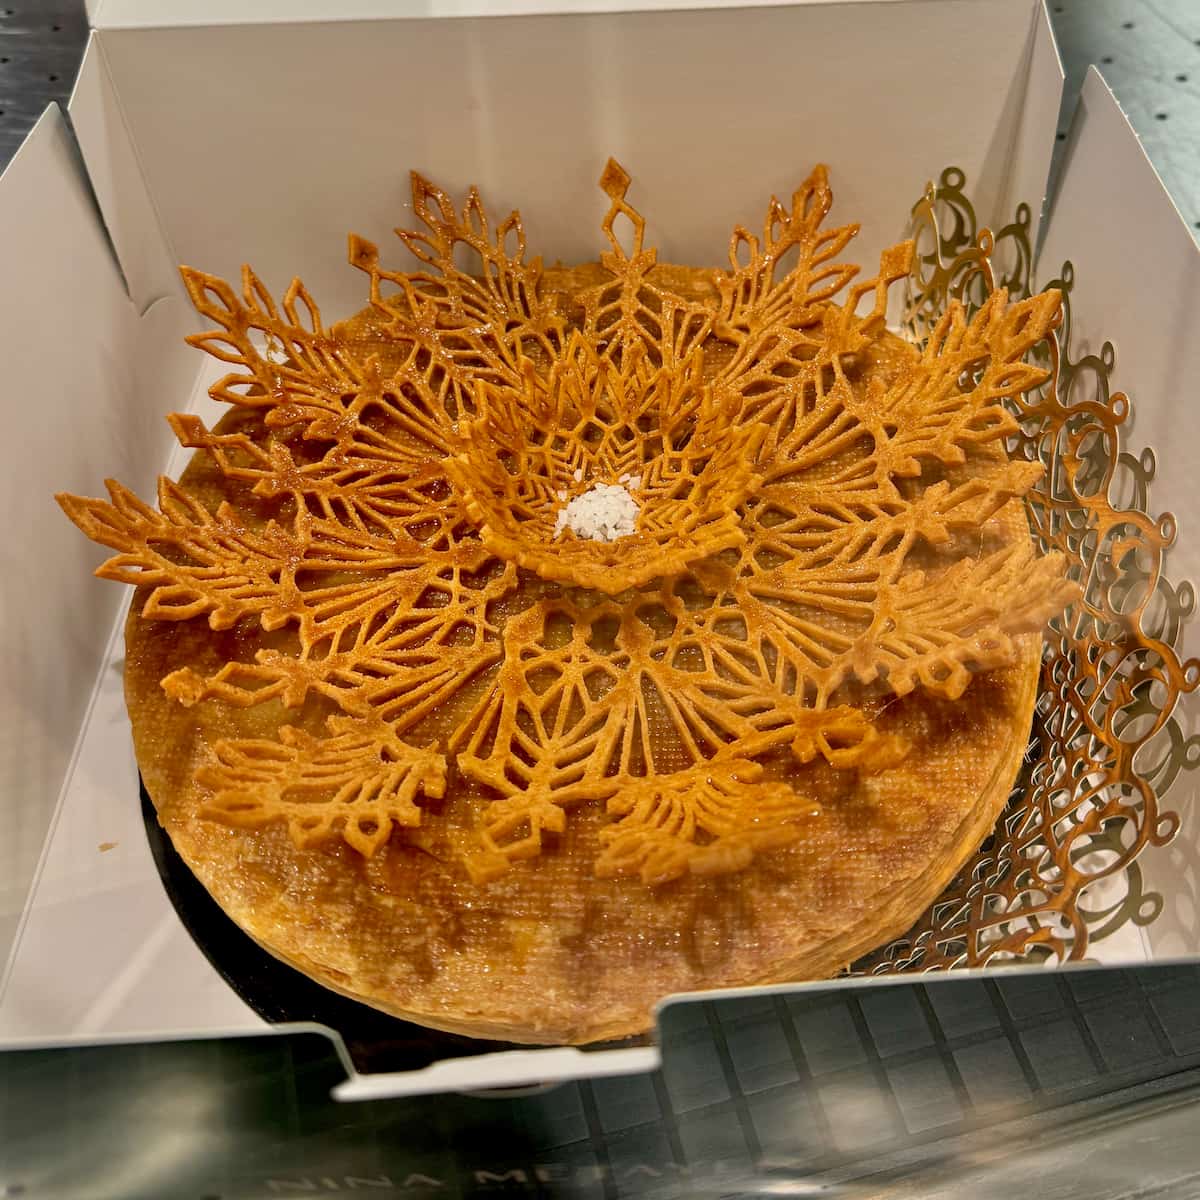 box of an ornate puff pastry cake with a lace like topping